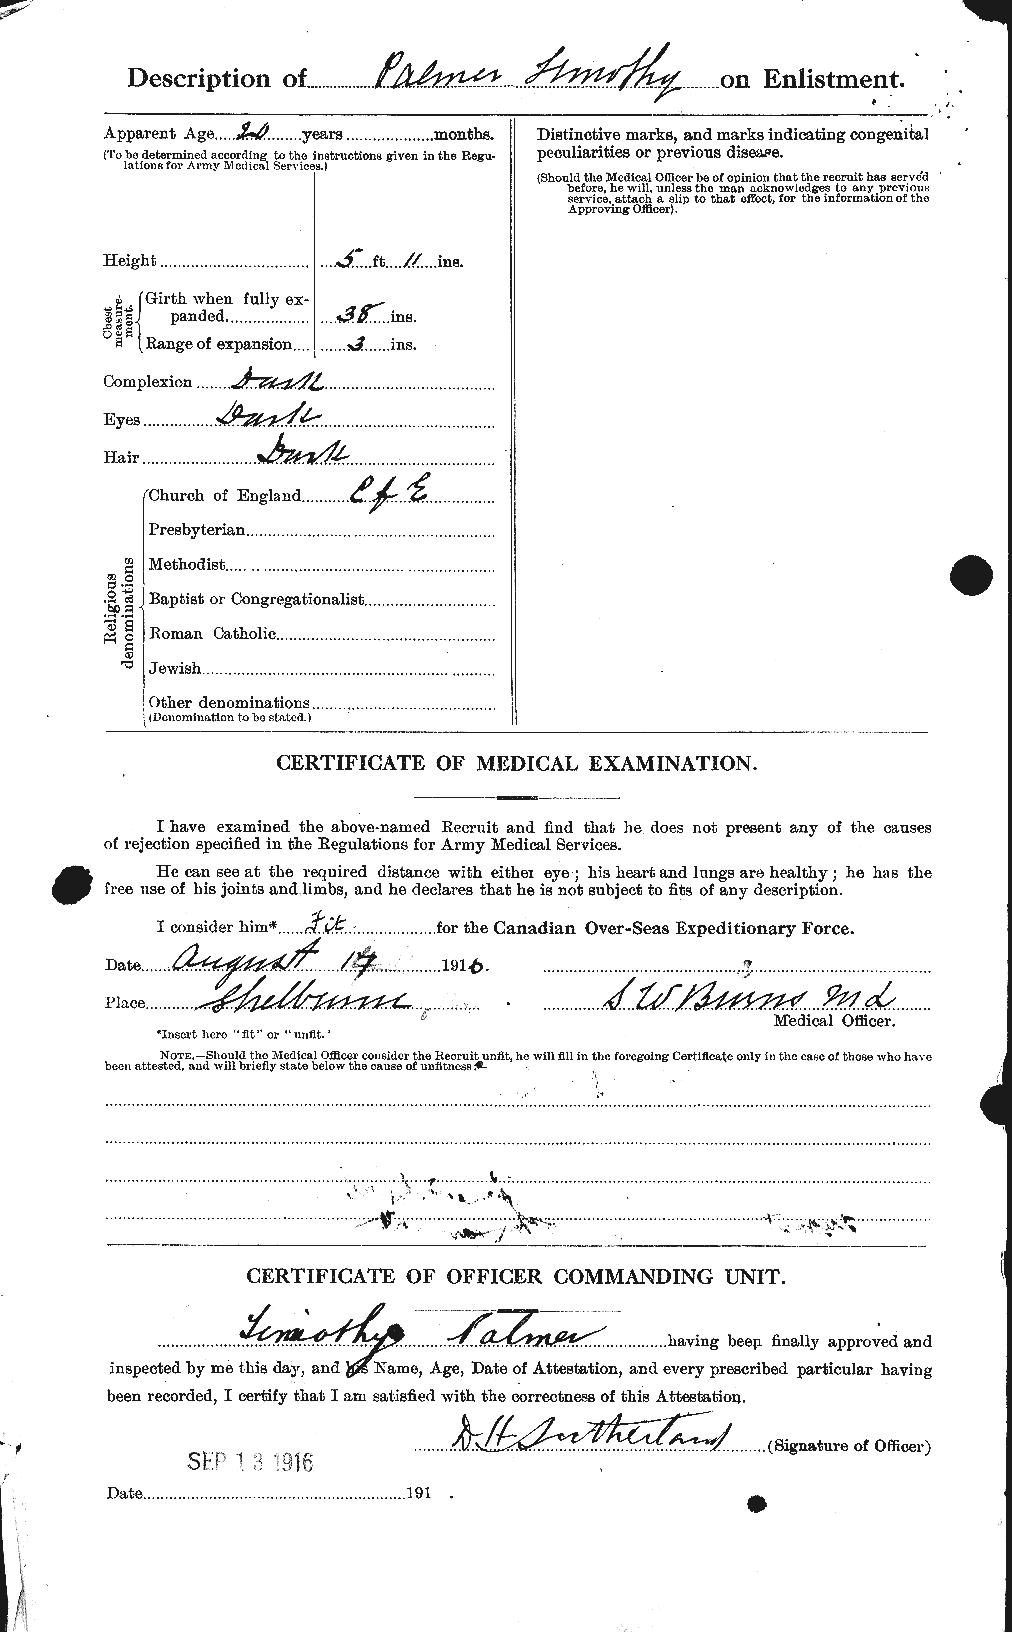 Personnel Records of the First World War - CEF 563179b